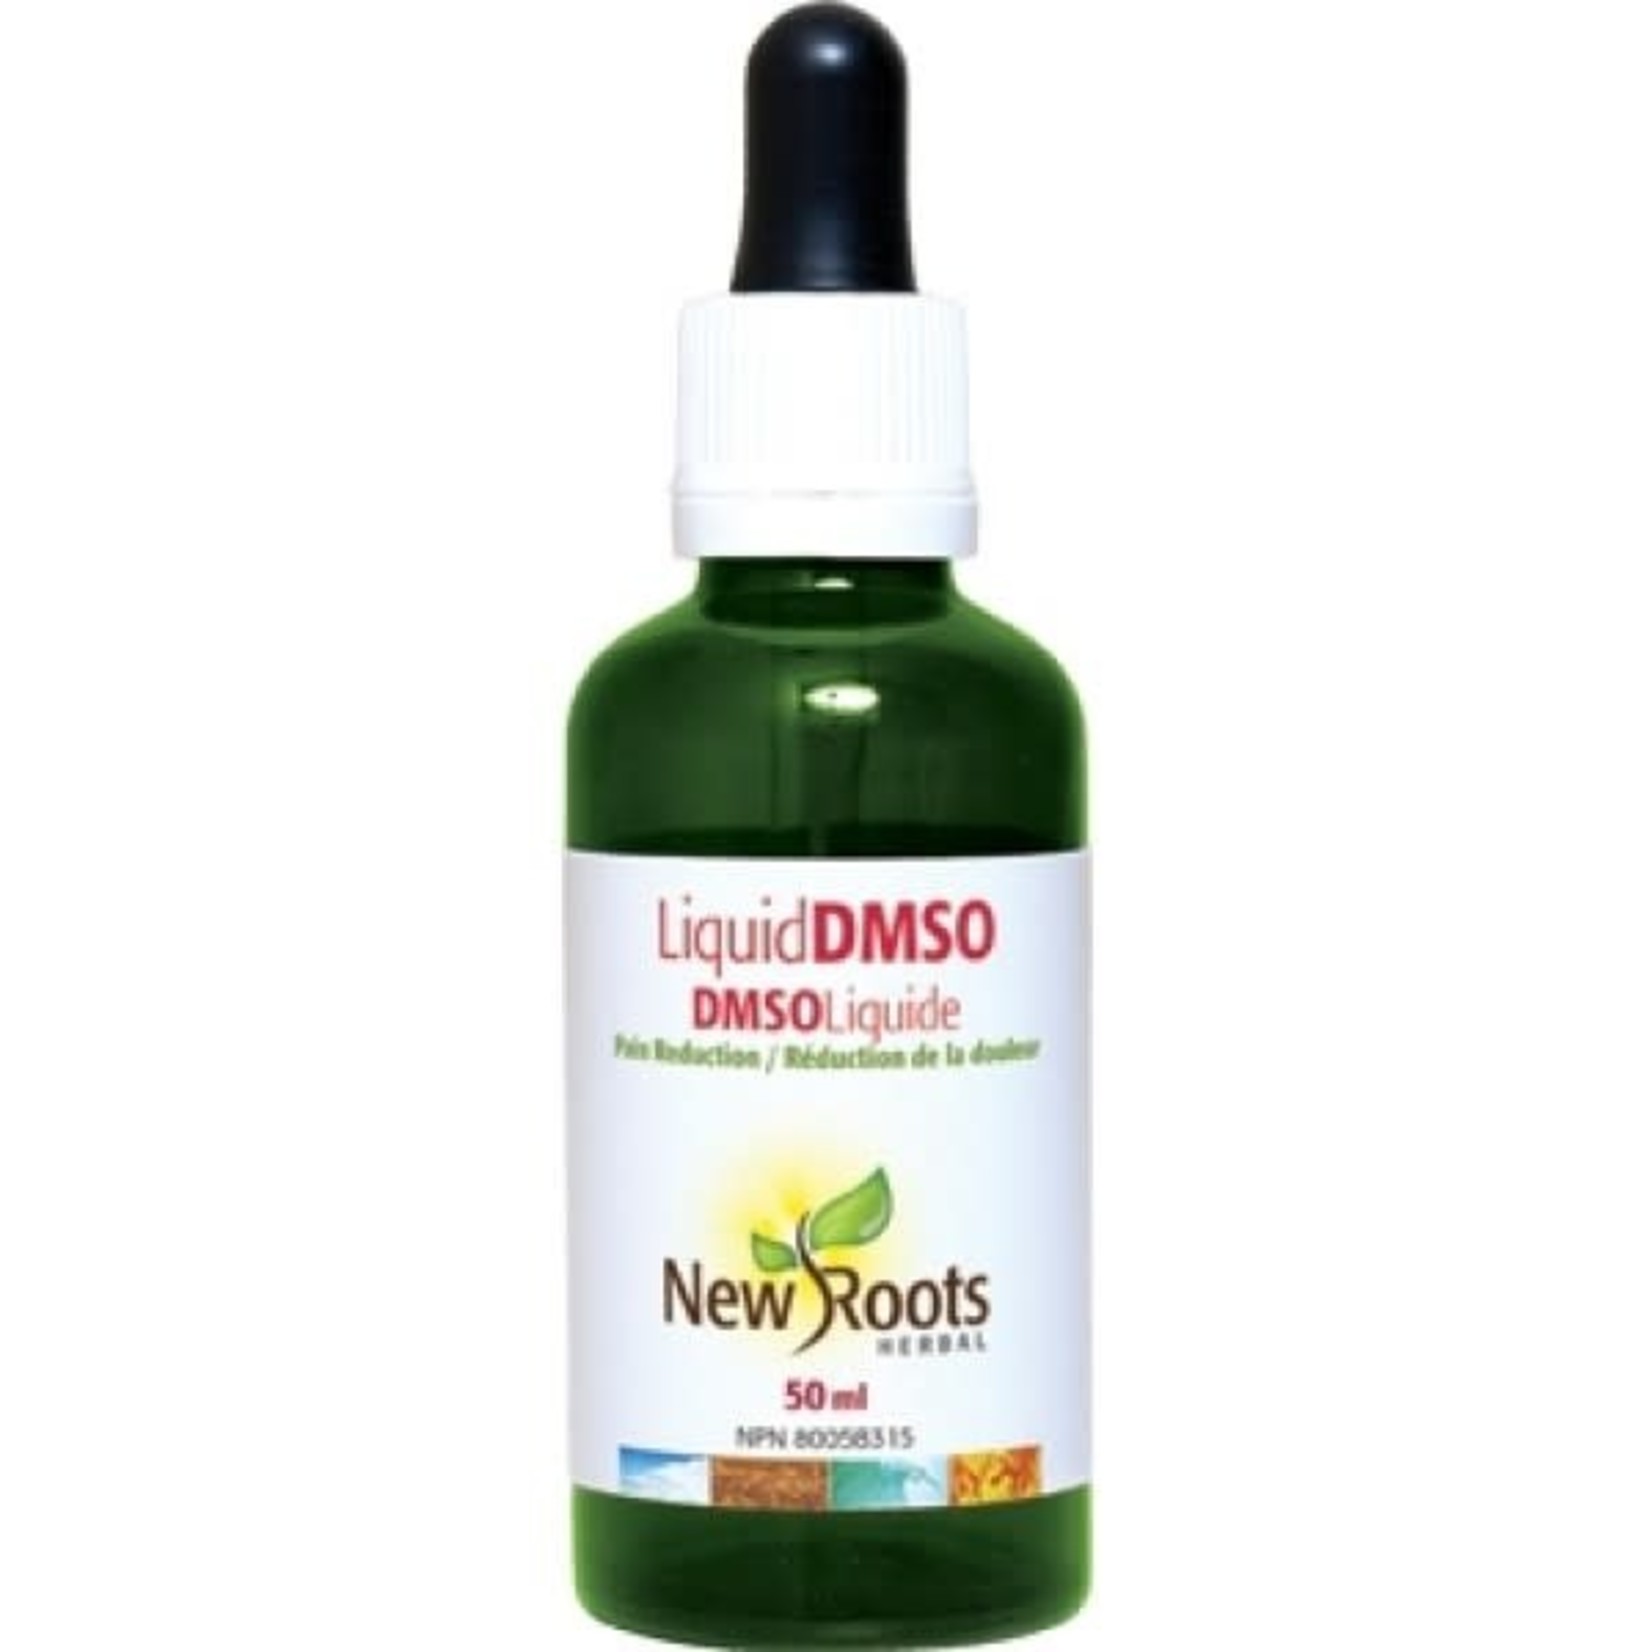 New Roots New Roots DMSO 50ml